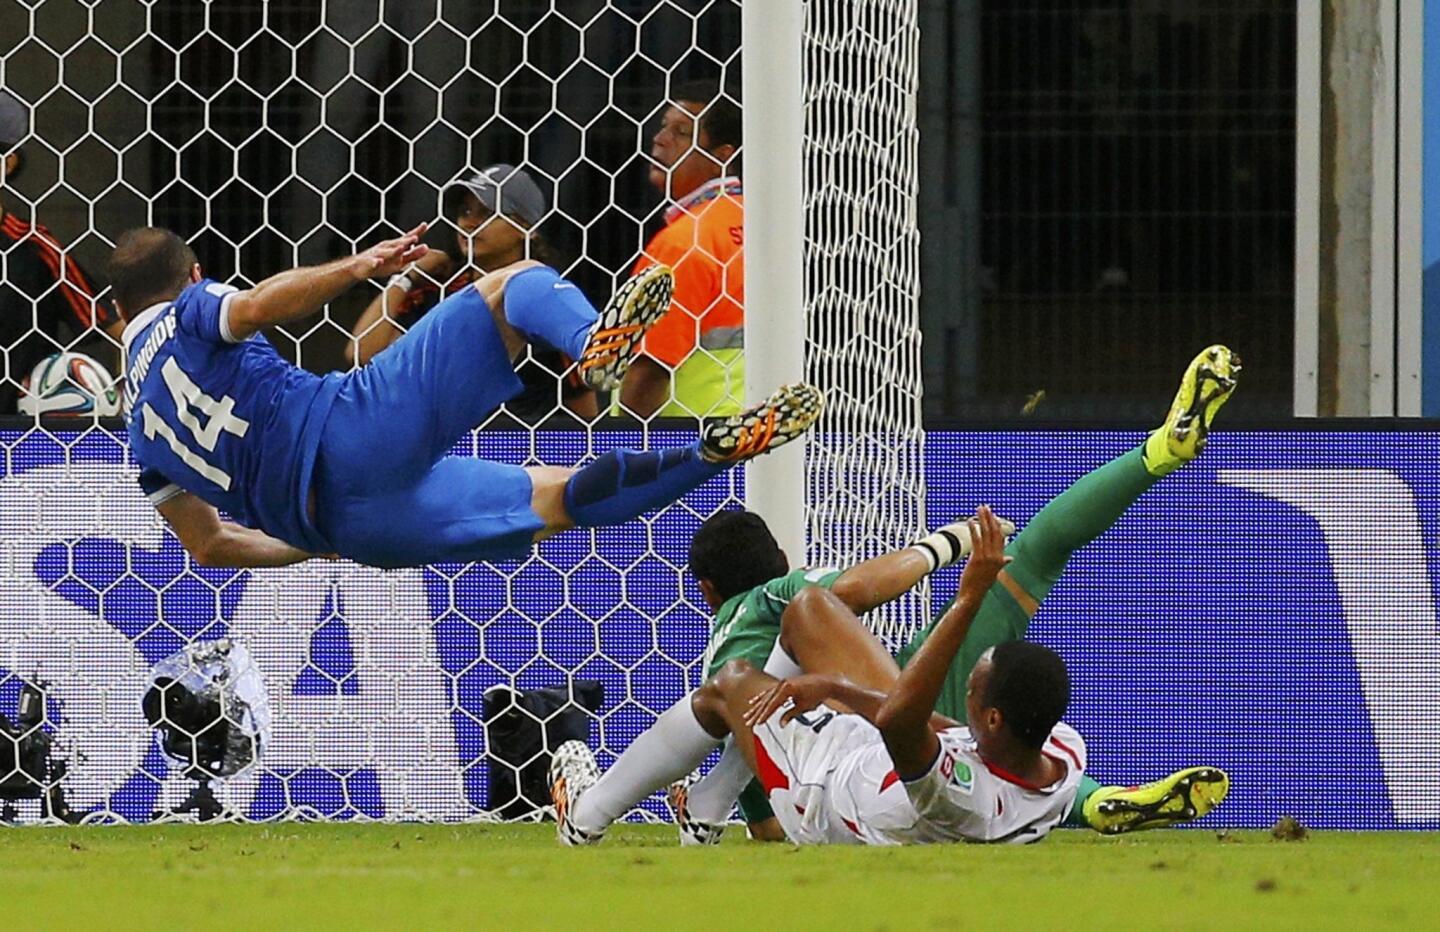 Costa Rica's goalkeeper Navas makes a save on a shot by Greece's Salpingidis during their 2014 World Cup round of 16 game at the Pernambuco arena in Recife